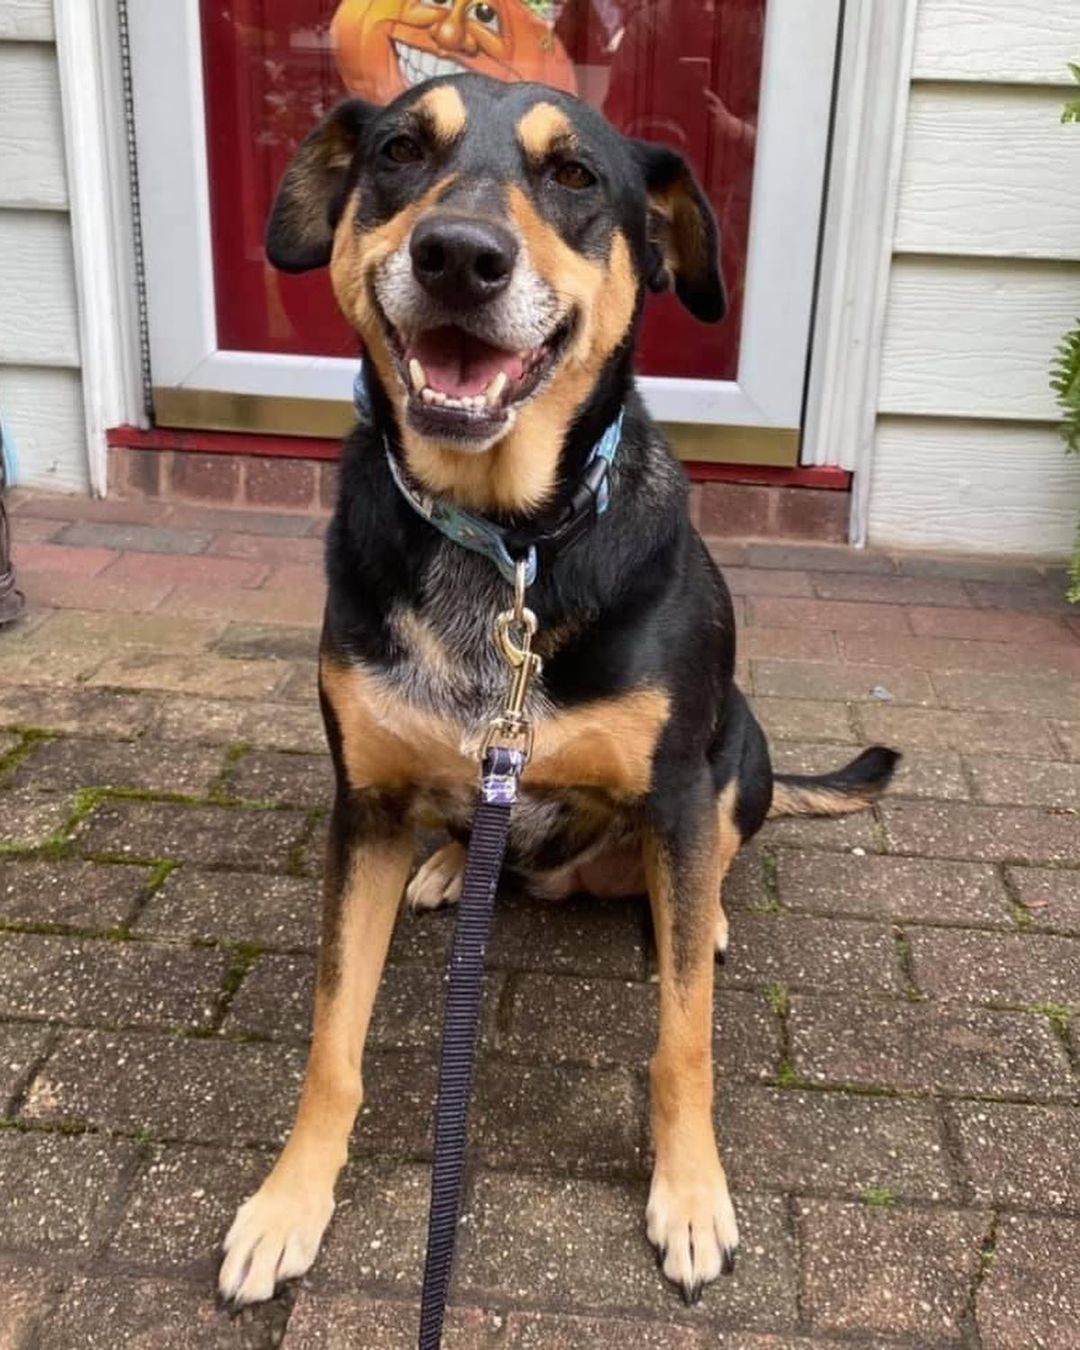 ✨Meet ROXY✨

Roxy is 99% perfect (and we want a perfect forever home for her!)
She is dog/cat friendly and the sweetest pupper ever! Look at that SMILE😍

Roxy is currently being fostered in East Meadow, NY. Think you might have the home she deserves? Contact us at reboundhounds@gmail.com!